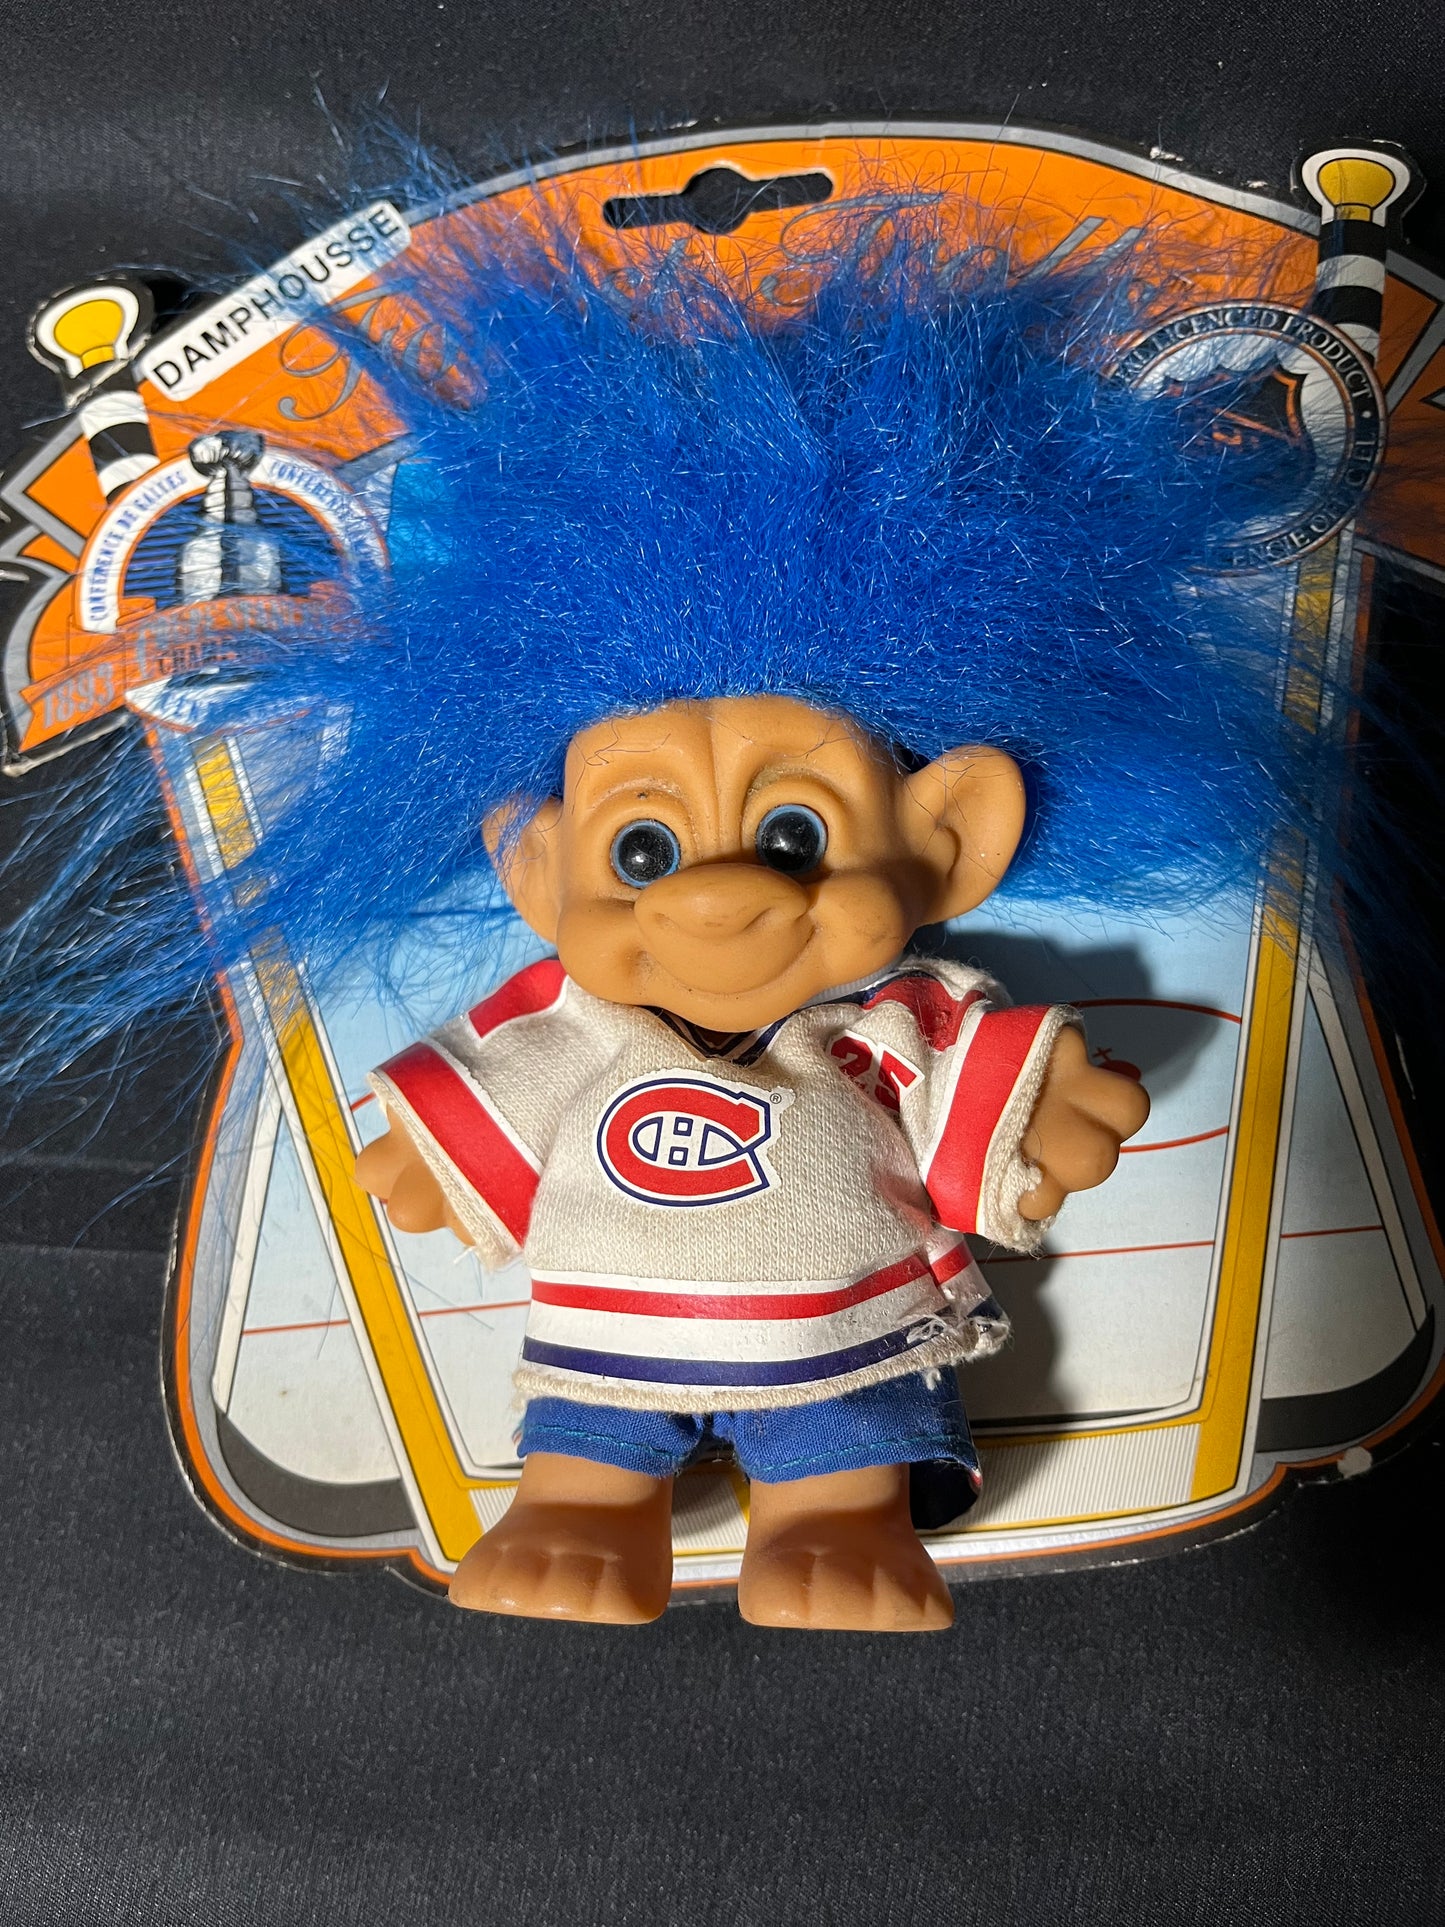 Forest Troll NHL Licensed Product - Montreal Canadians Damphousse #25